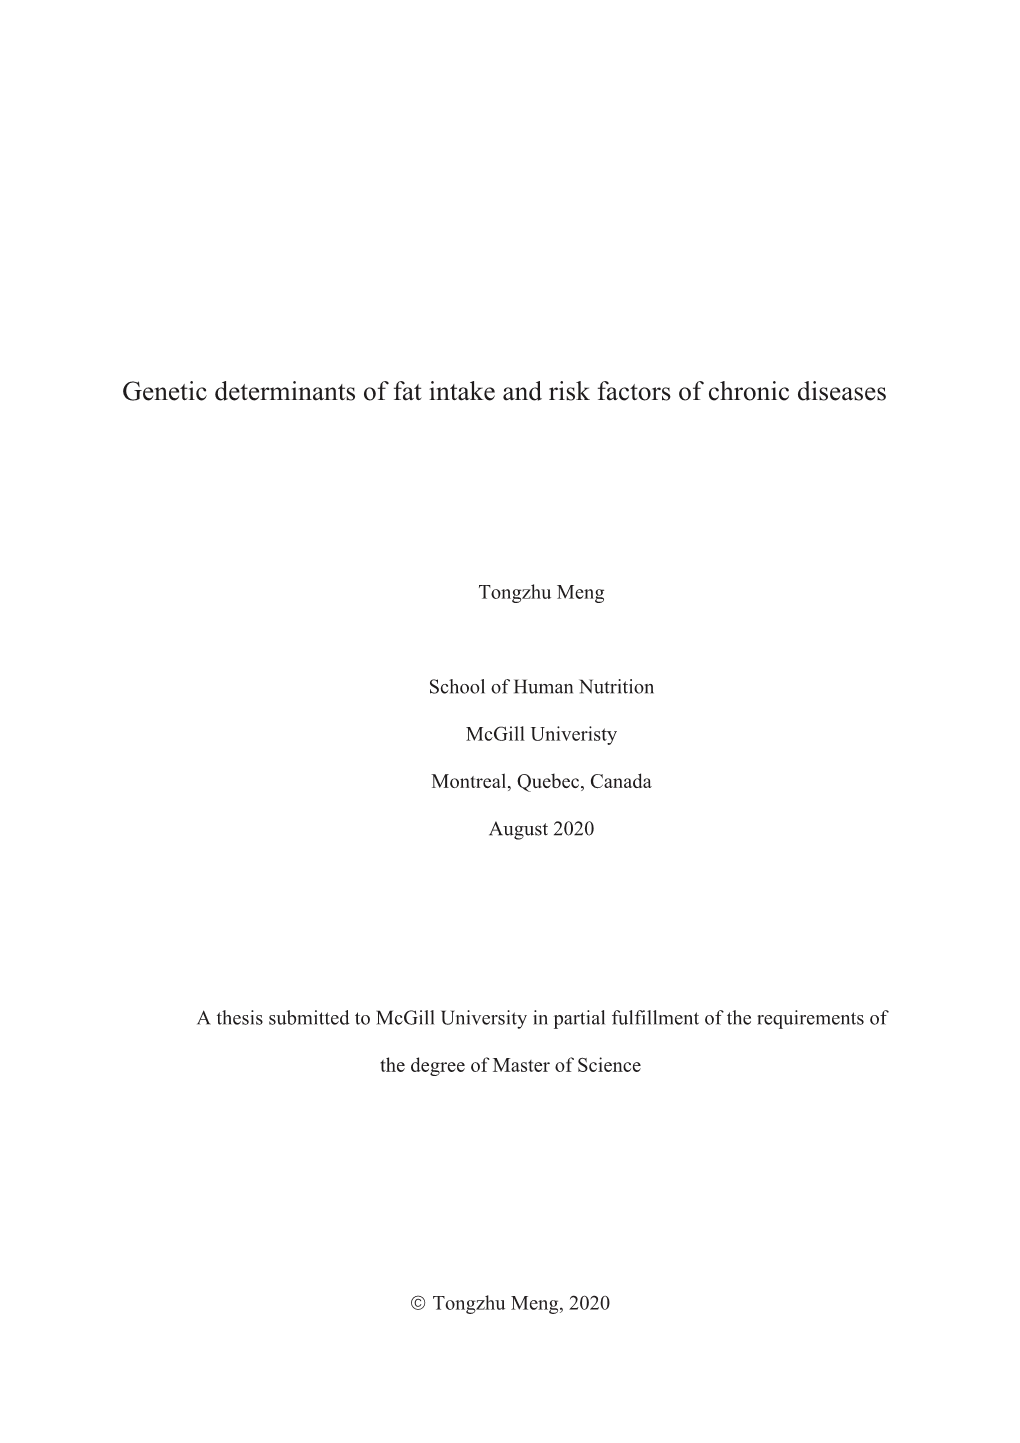 Genetic Determinants of Fat Intake and Risk Factors of Chronic Diseases